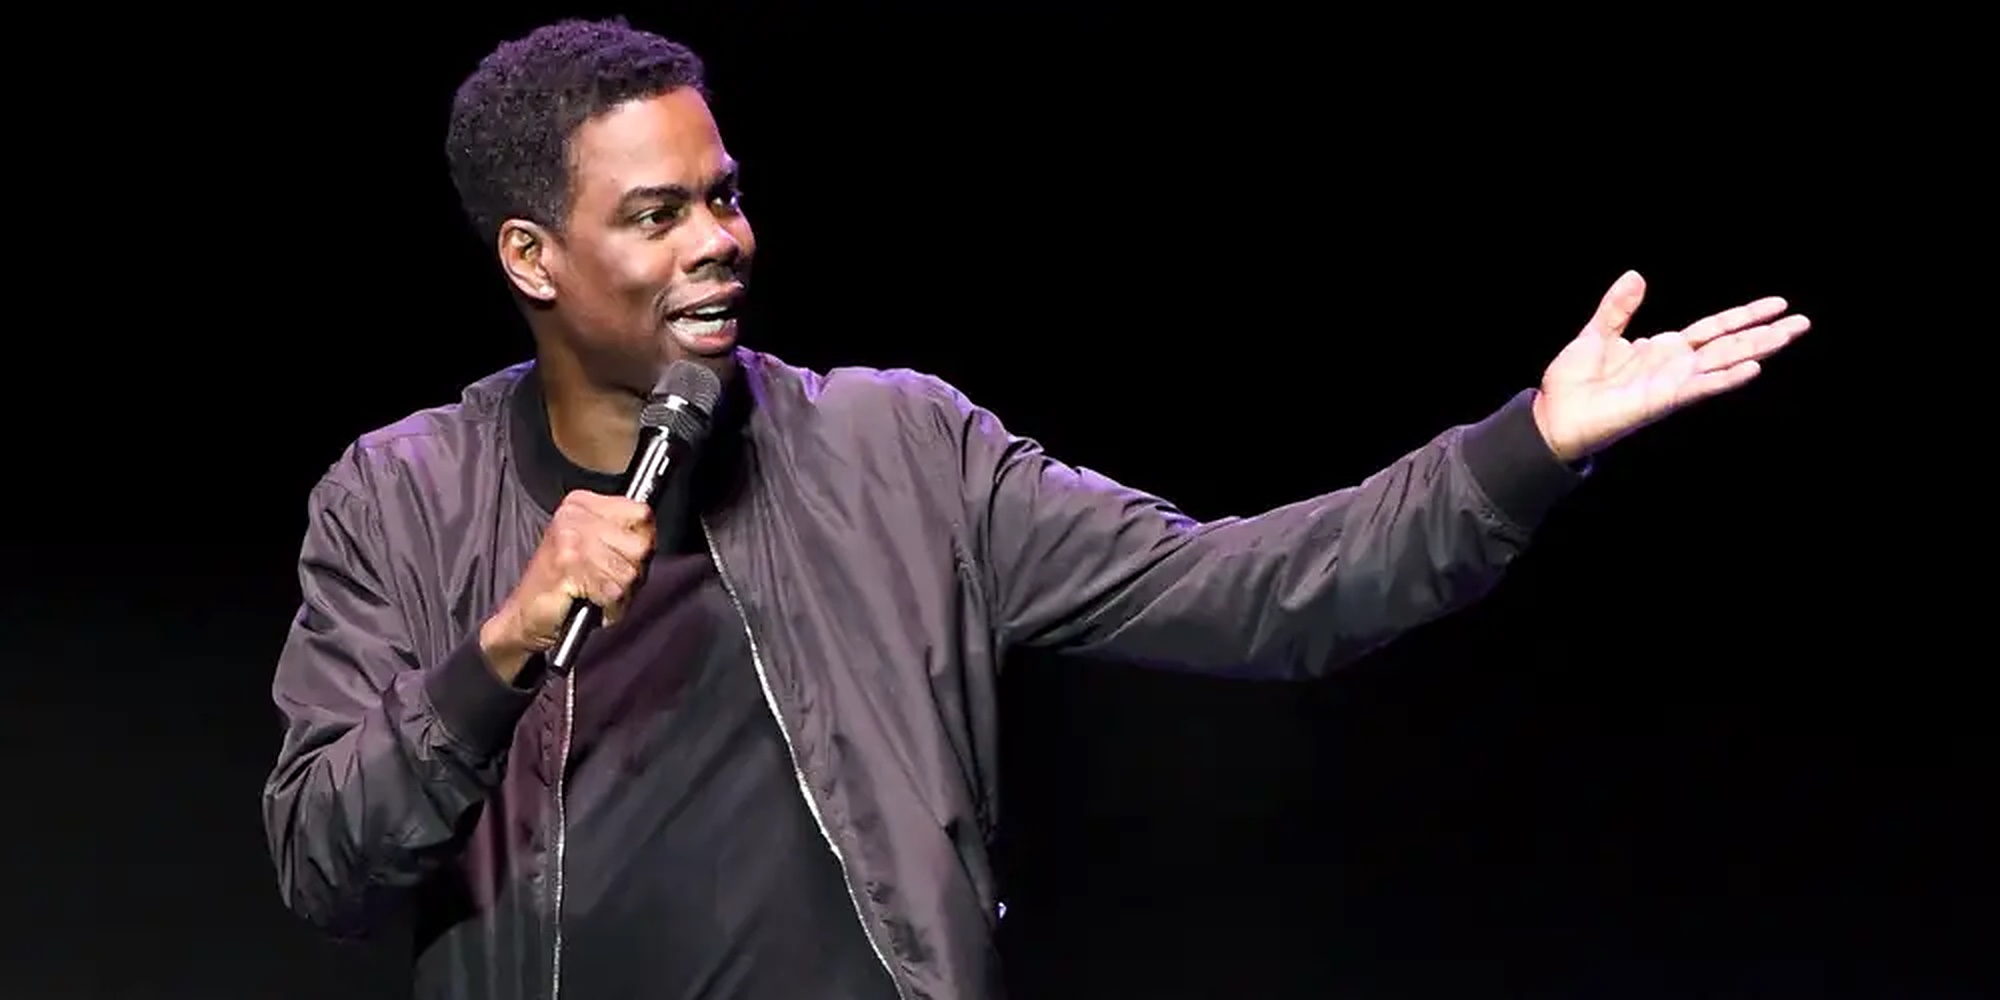 Chris Rock Is Keeping His Mouth Shut About the Oscars Slap Until He Secures the Bag